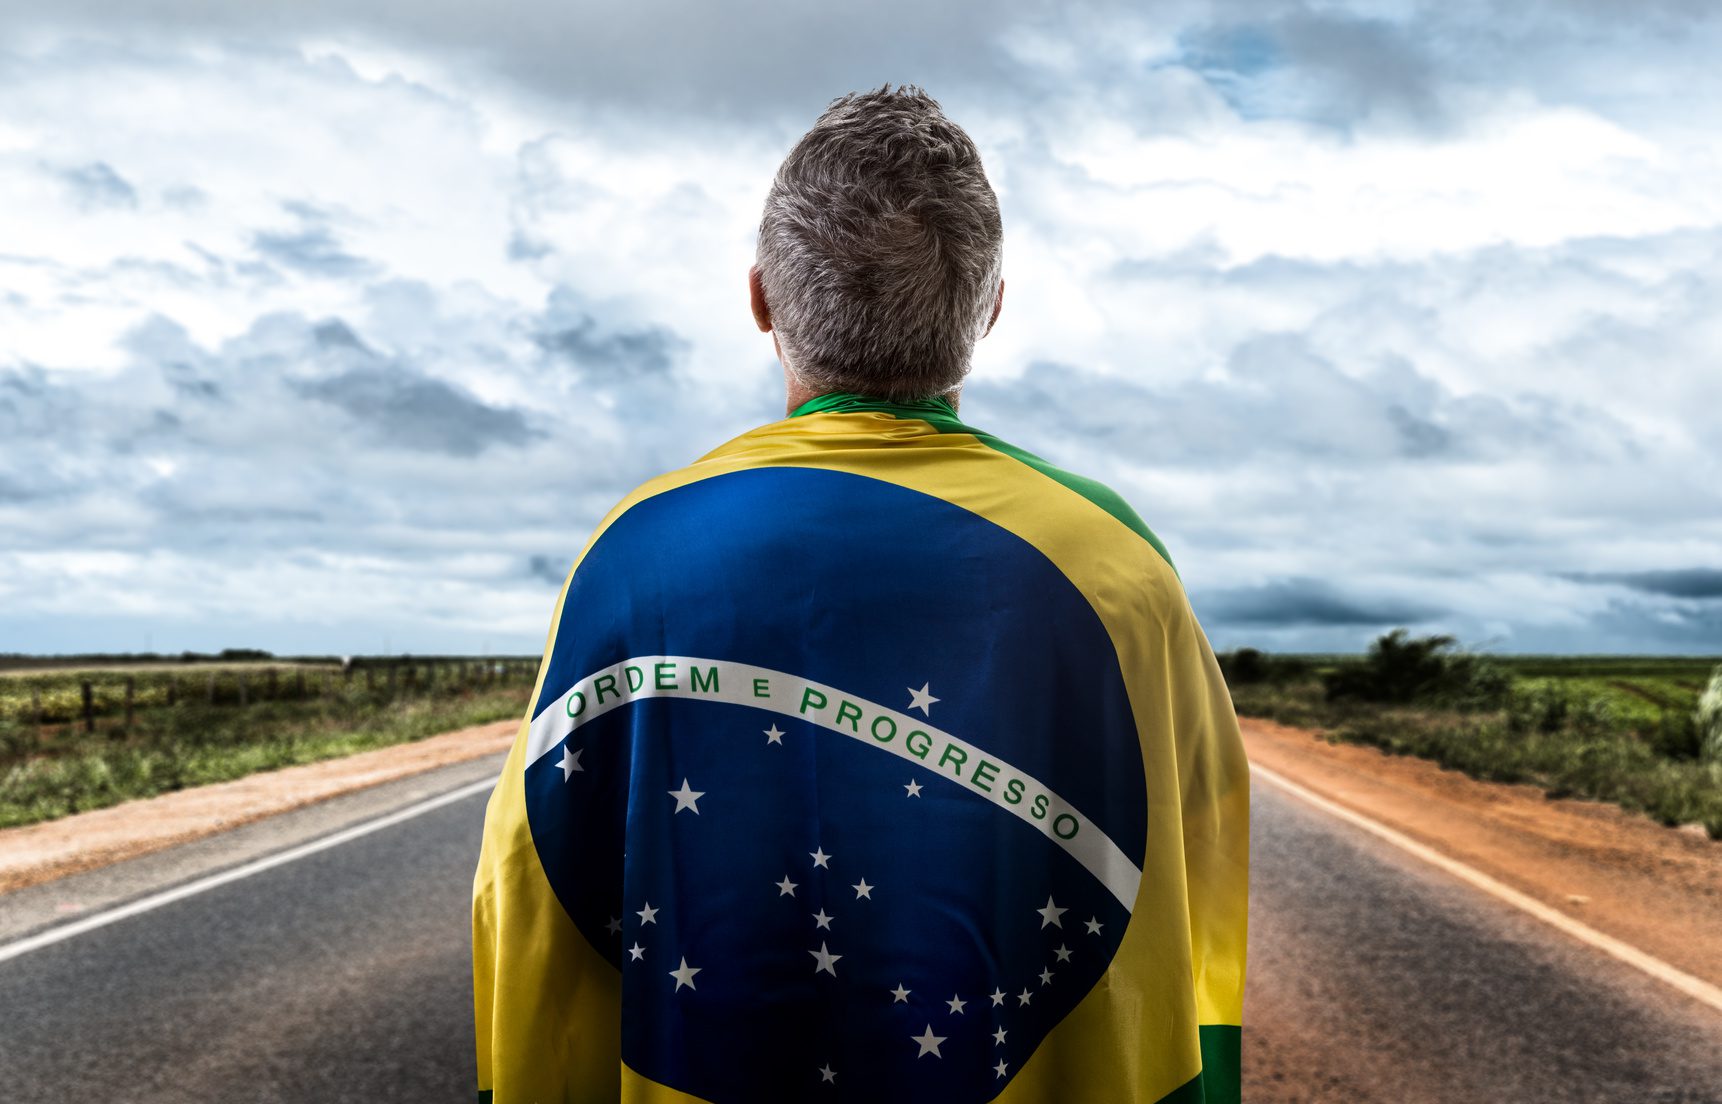 2014 FIFA World Cup Brazil – A Squandered Opportunity